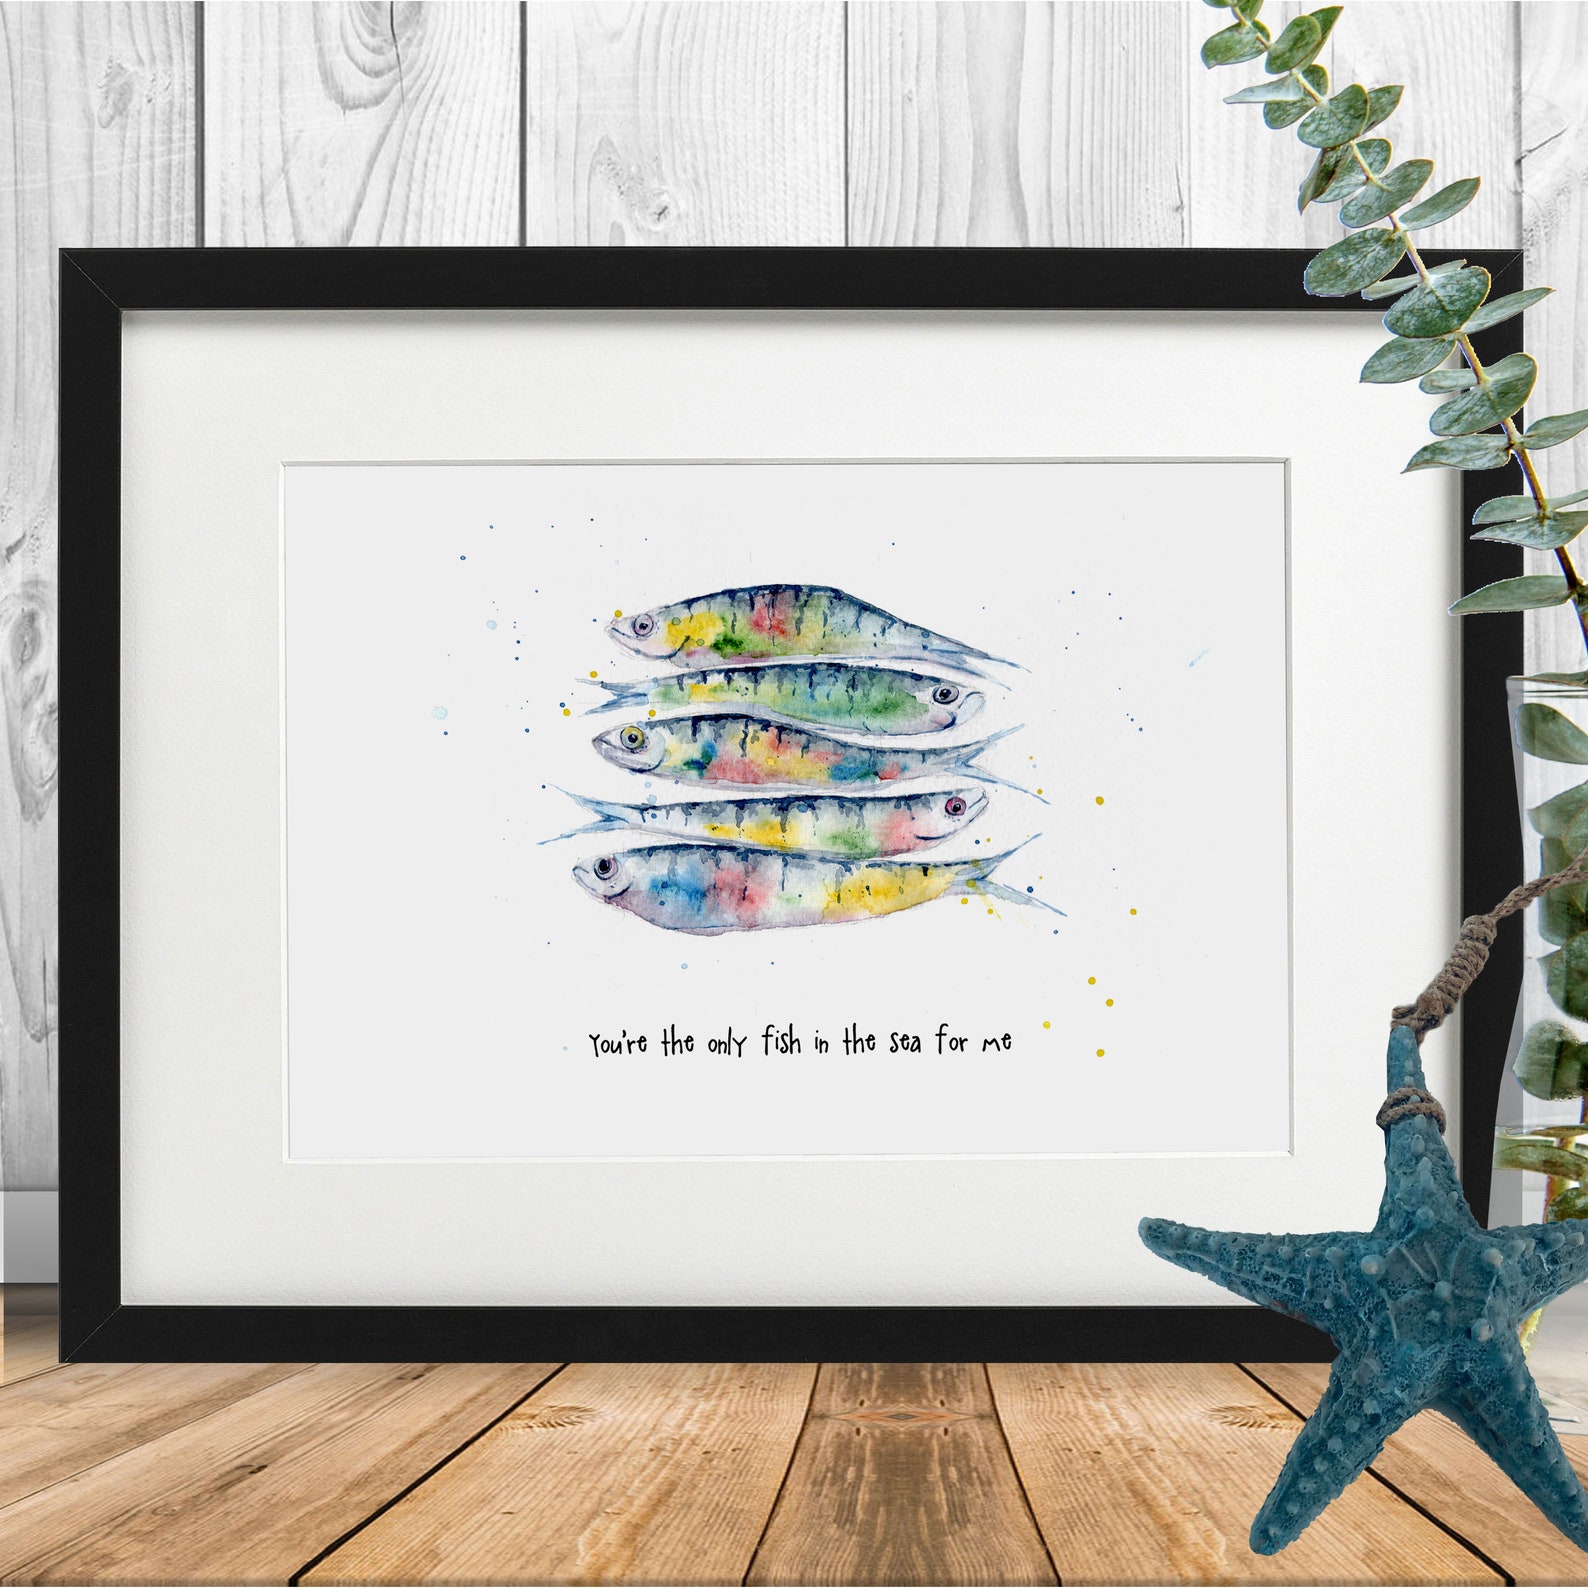 Fish art print. You're the only fish in the sea for me. | Etsy